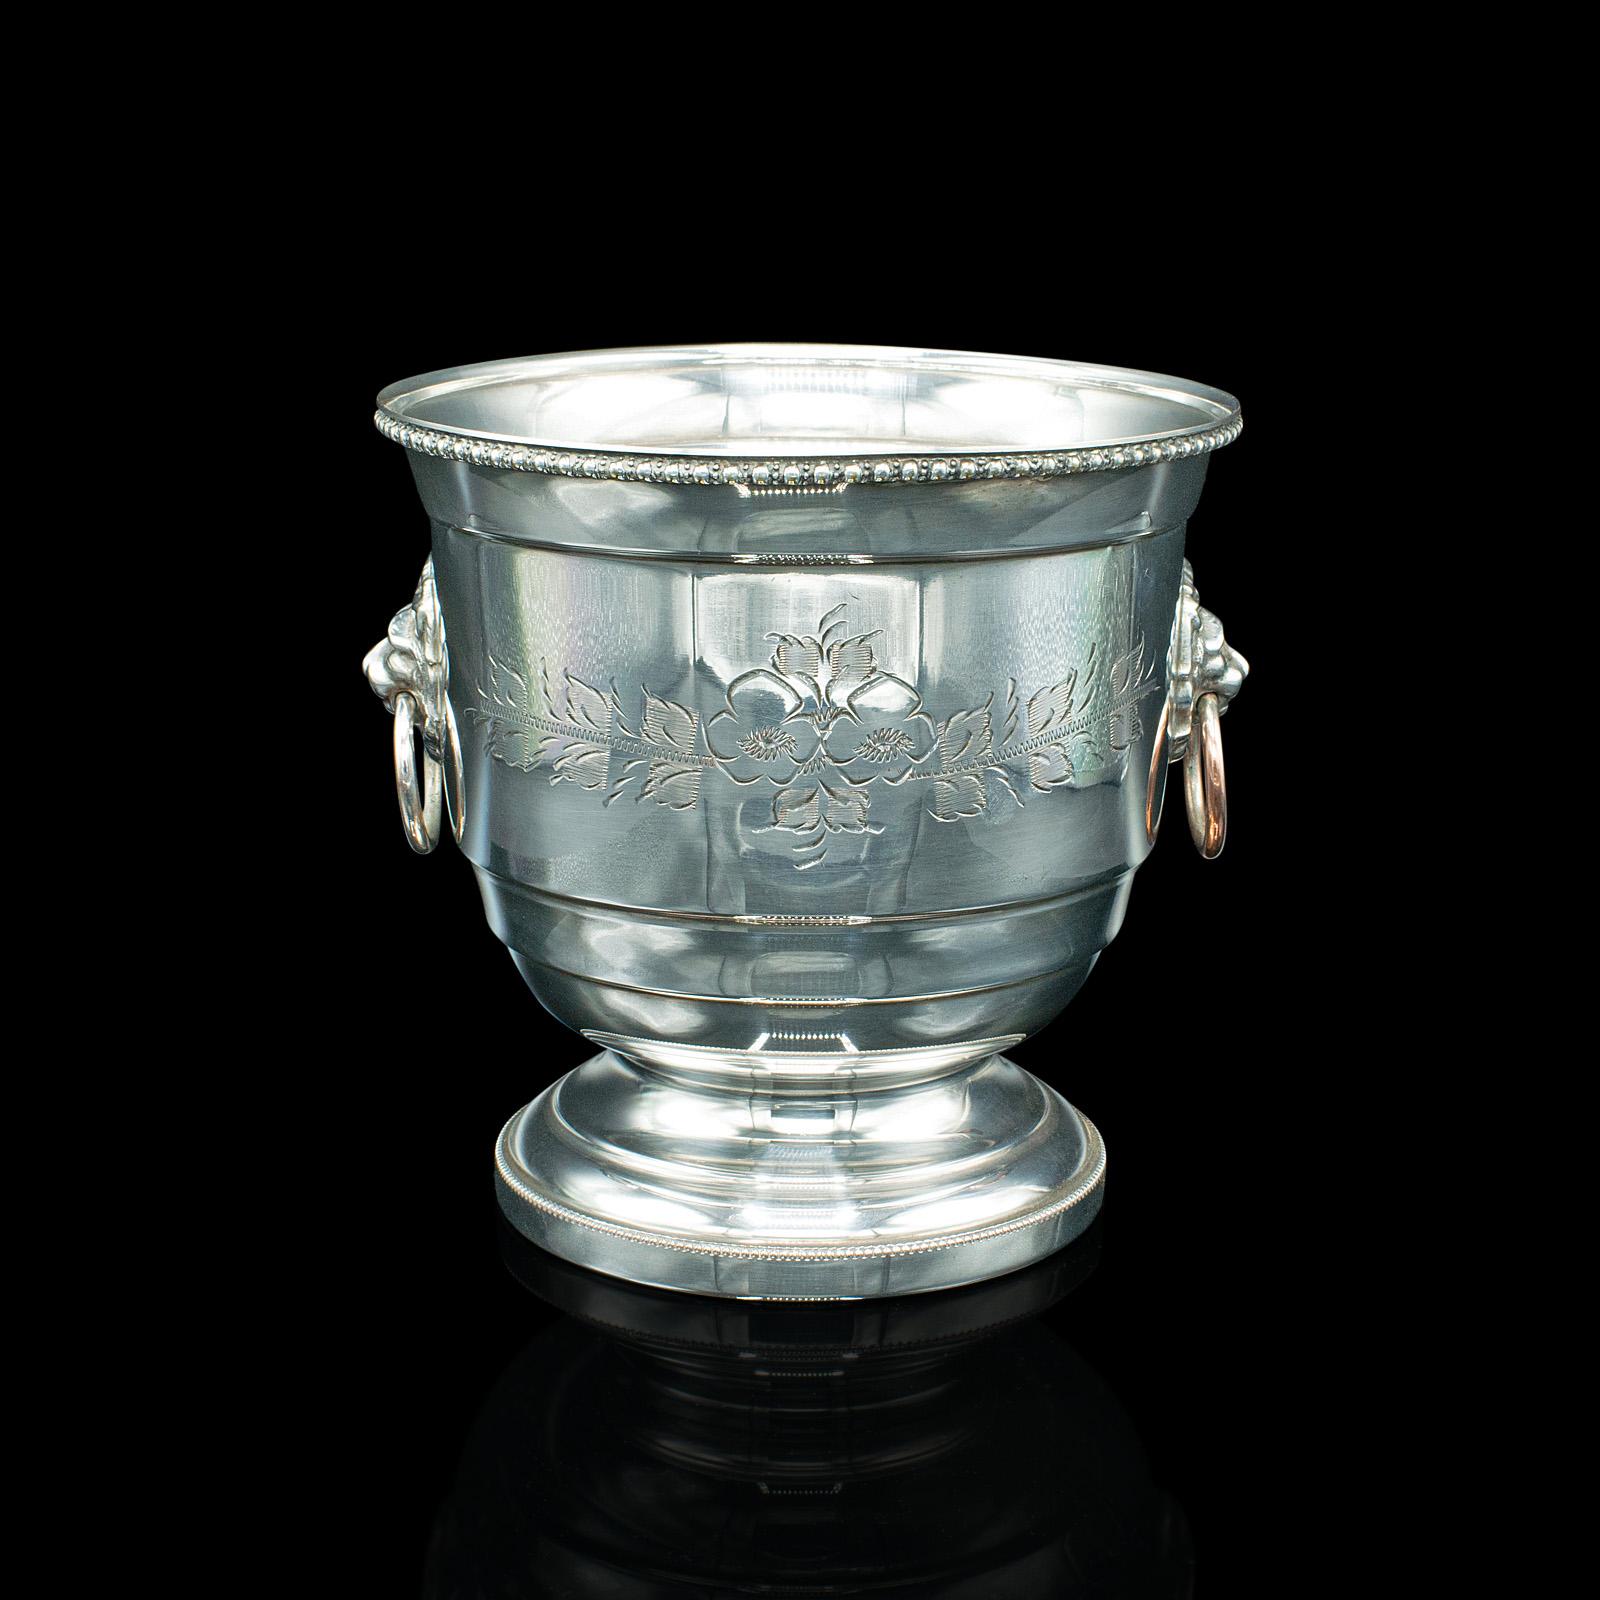 This is a vintage champagne bottle cooler. An English, silver plate ice bucket, dating to the mid 20th century, circa 1950.

Appealing bottle cooler with hand-engraved detail
Displays a desirable aged patina and in good order
Bright silver plate